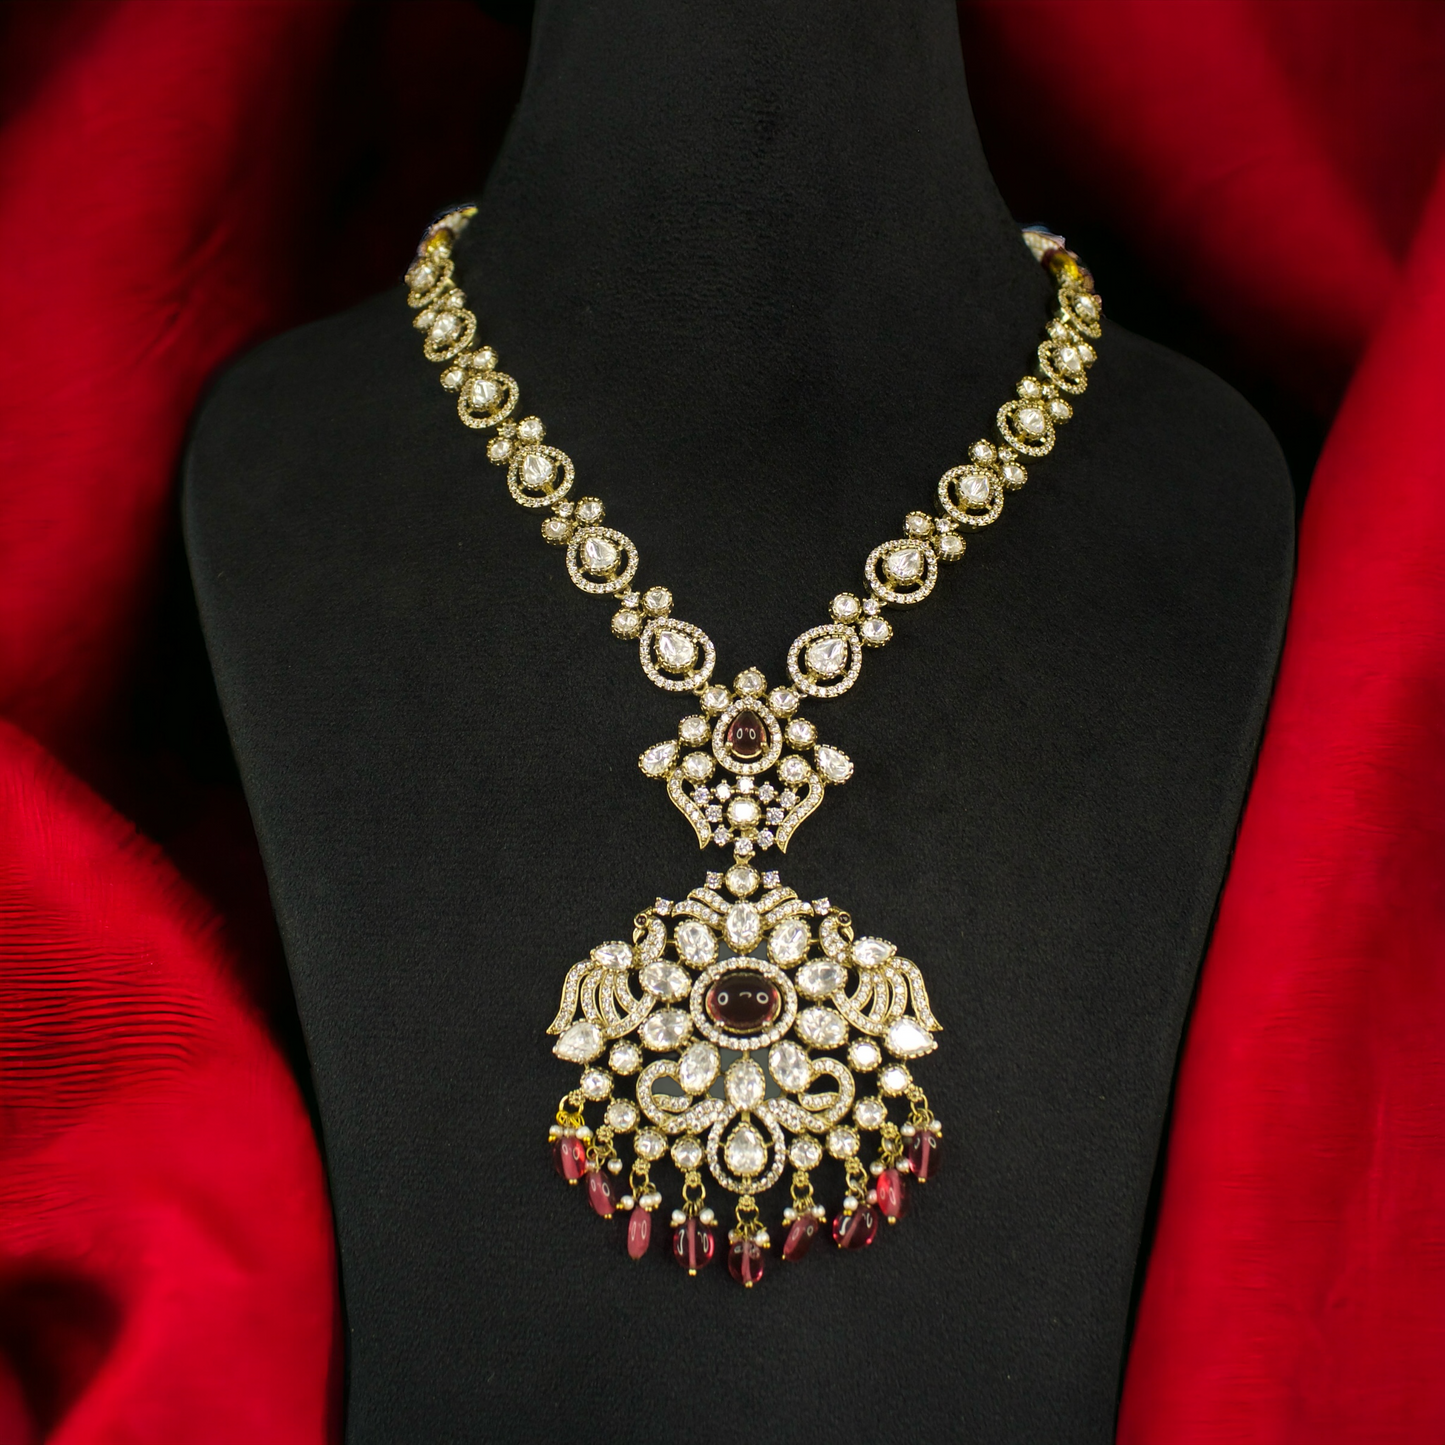 Antique Victorian Necklace Set in Ruby colour with zircon, moissanite polki stones, peacock motif, pearls, and beads. This Victorian Jewellery is available in a Red colour variant. 